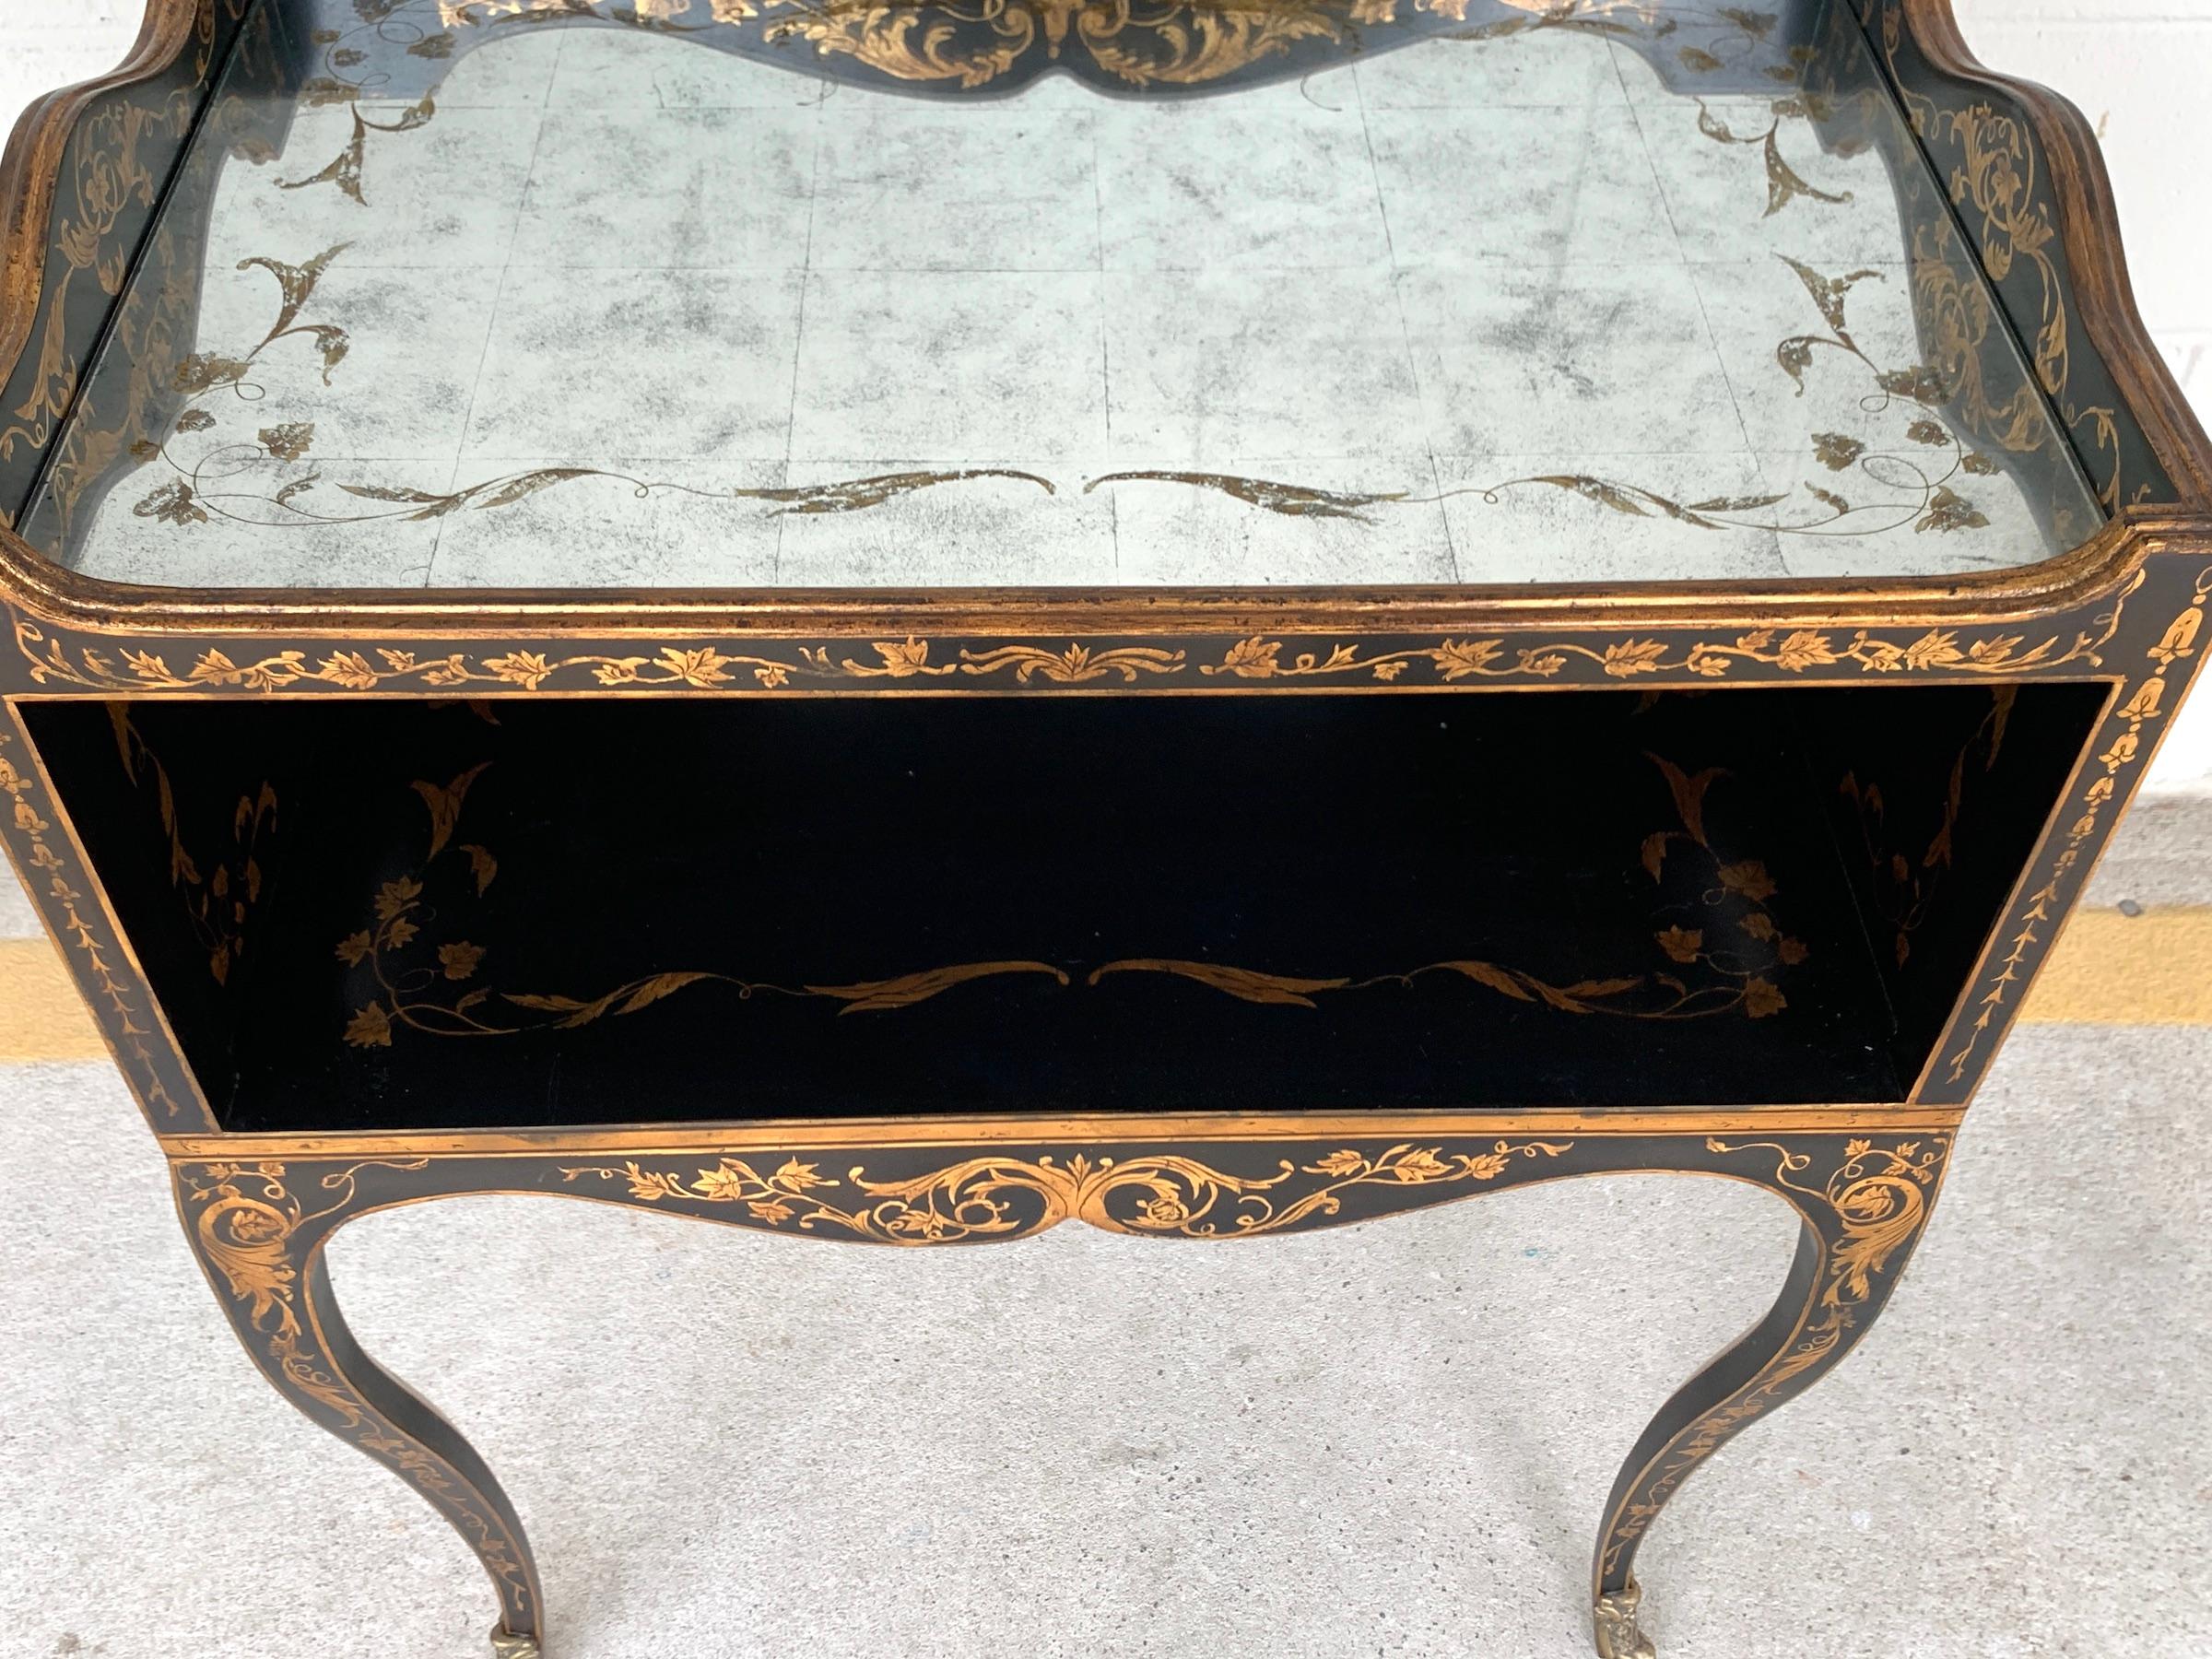 Exquisite Venetian Style Églomisé Gilt Lacquered Tiered End Table/ Nightstand In Good Condition For Sale In Atlanta, GA